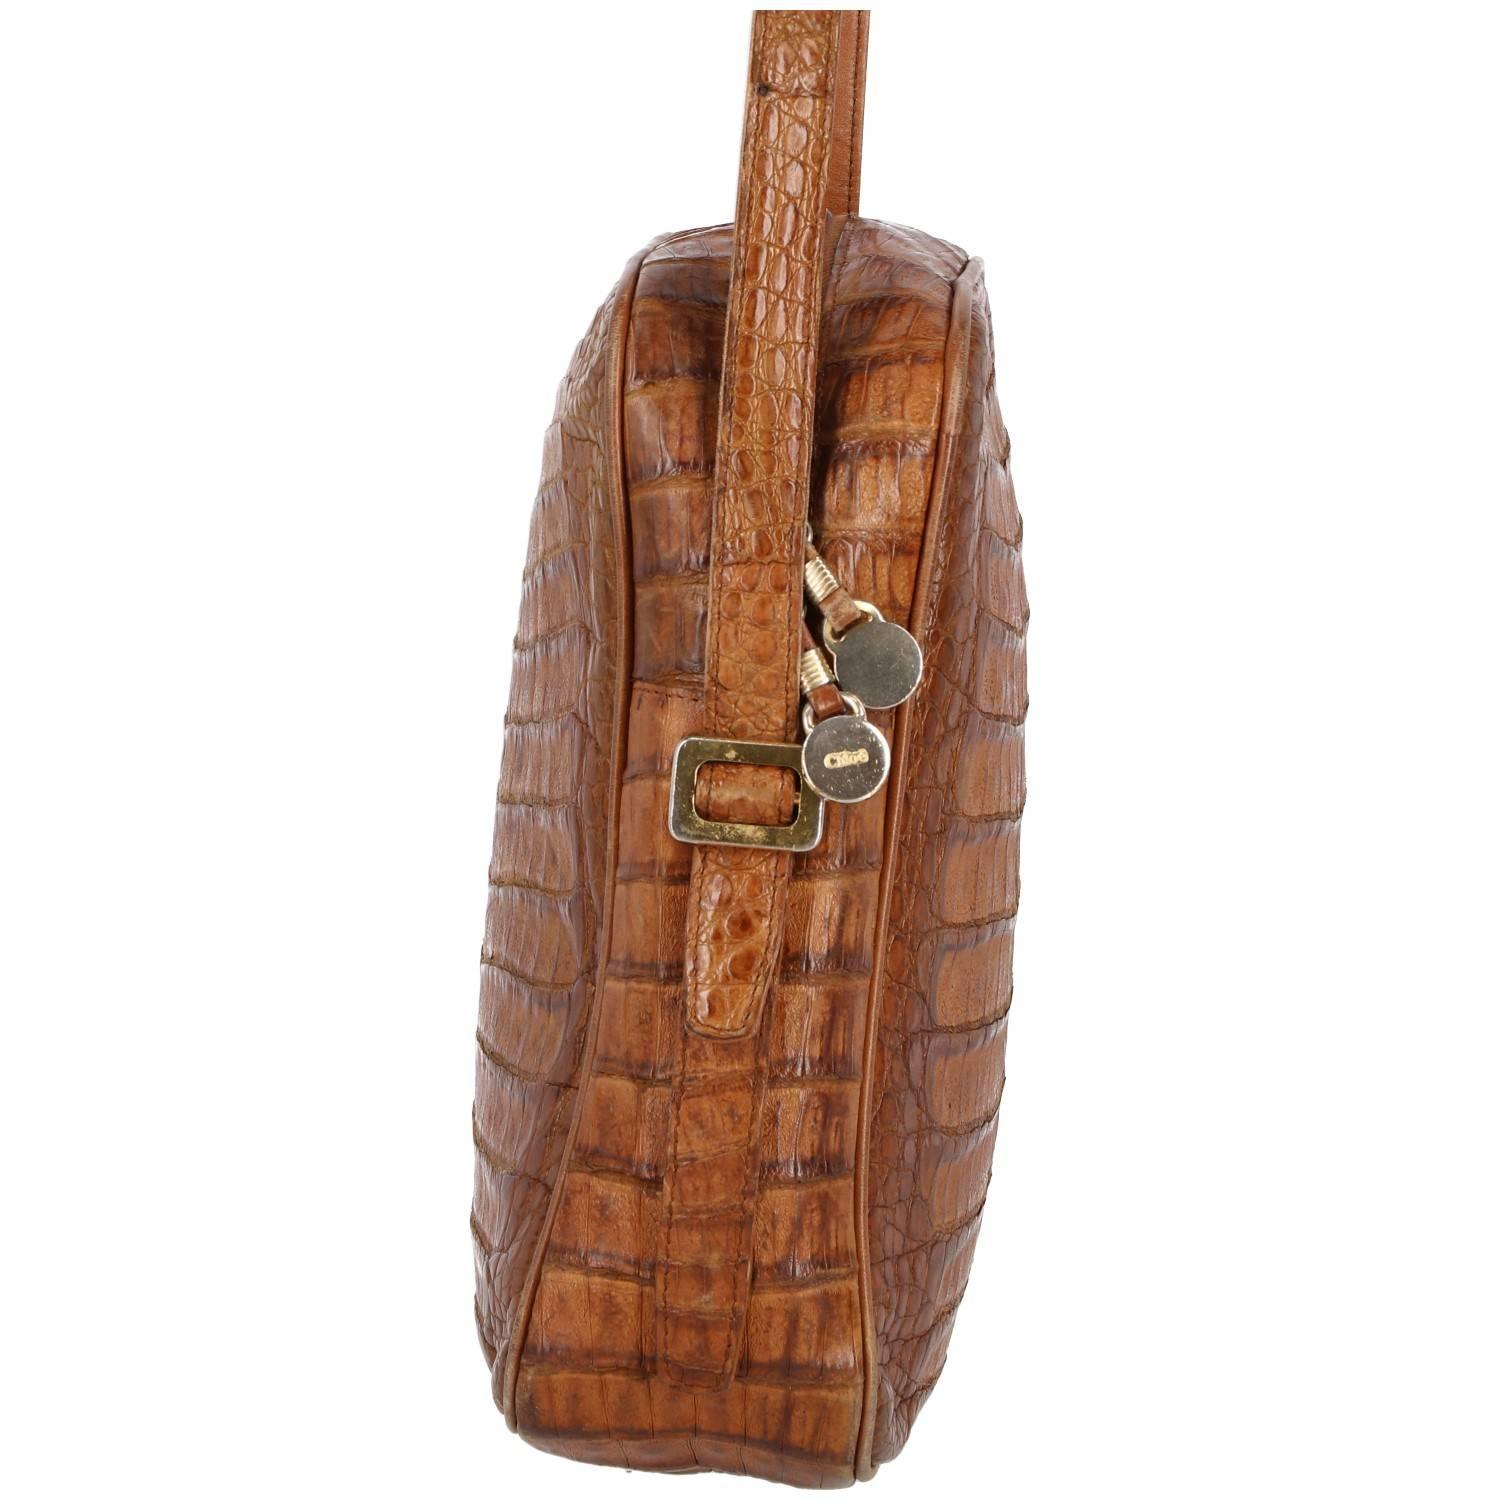 Soft caramel crocodile leather bag by Chloé. This is a lovely vintage piece from the 1980s featuring a removable strap. Metal details and leather corners show small signs of wear.
Please note this item cannot be shipped outside the European